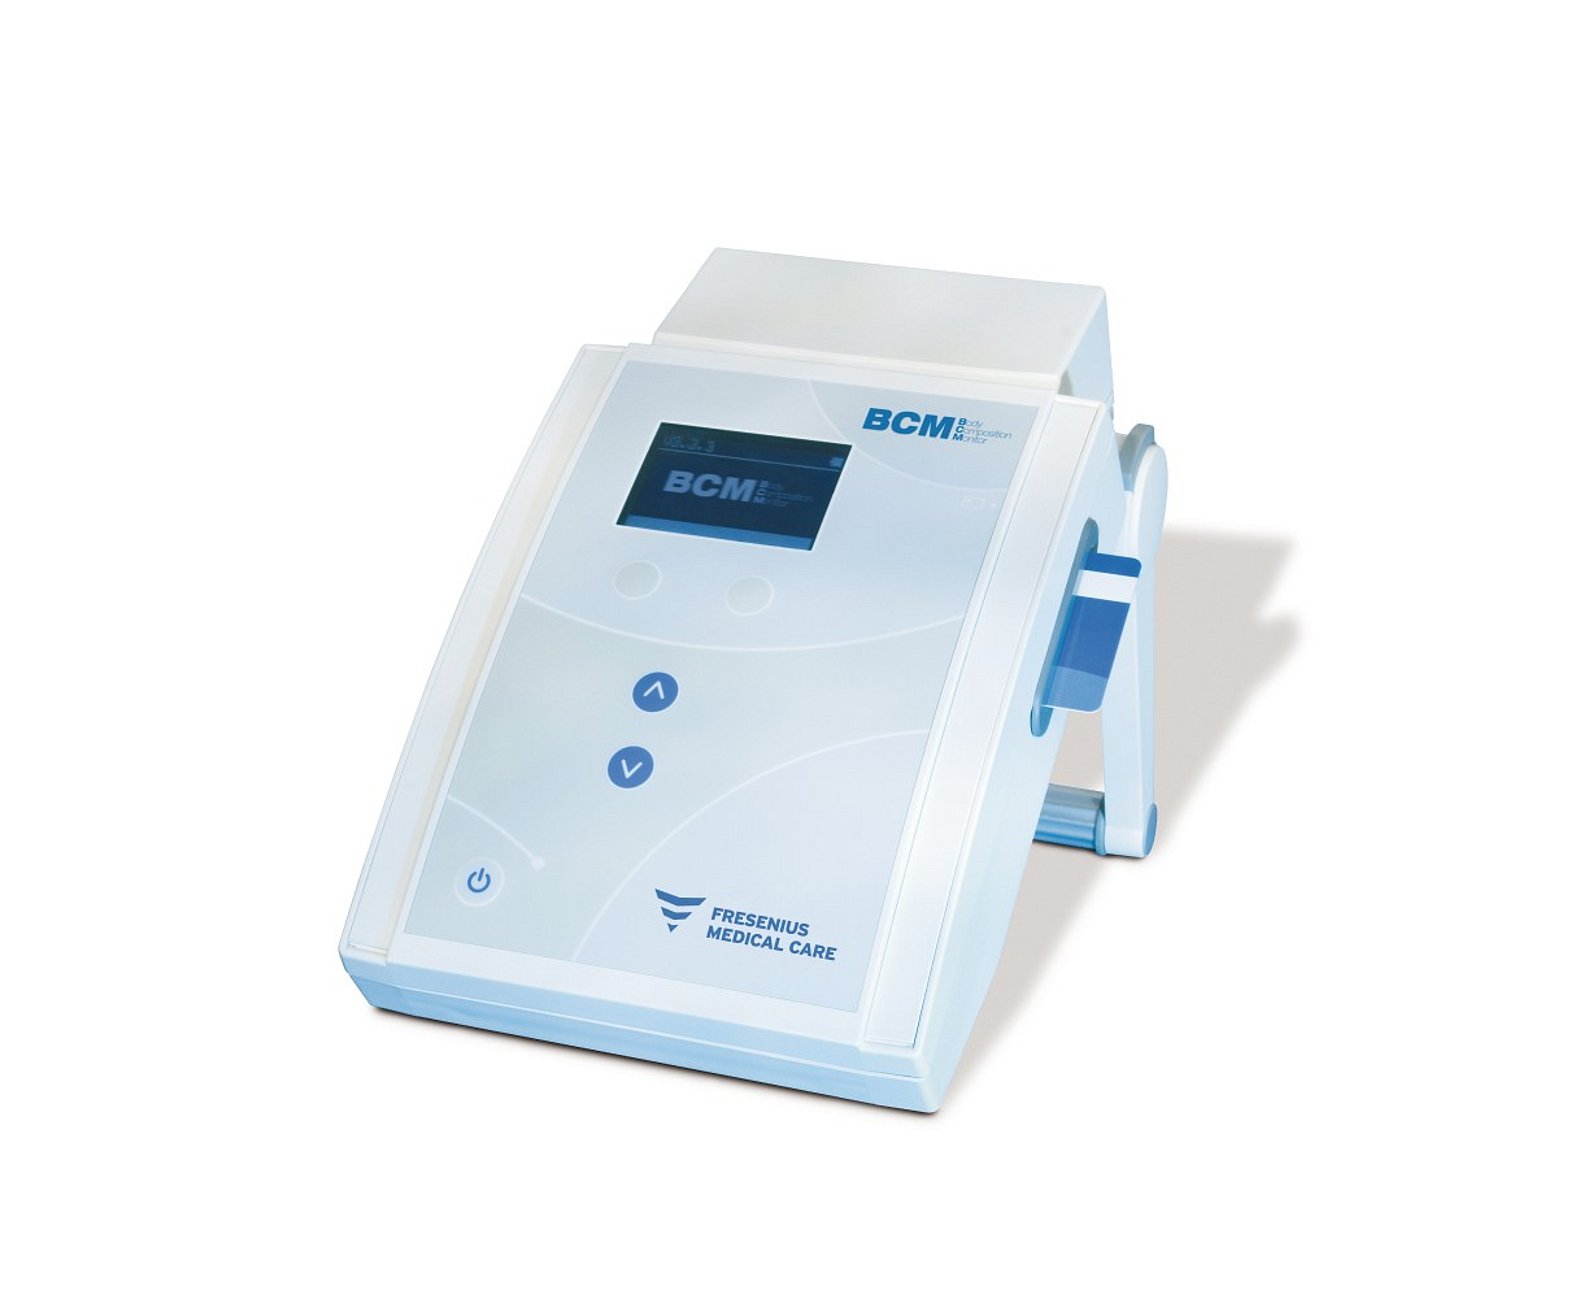 BCM-Body Composition Monitor from Fresenius Medical Care